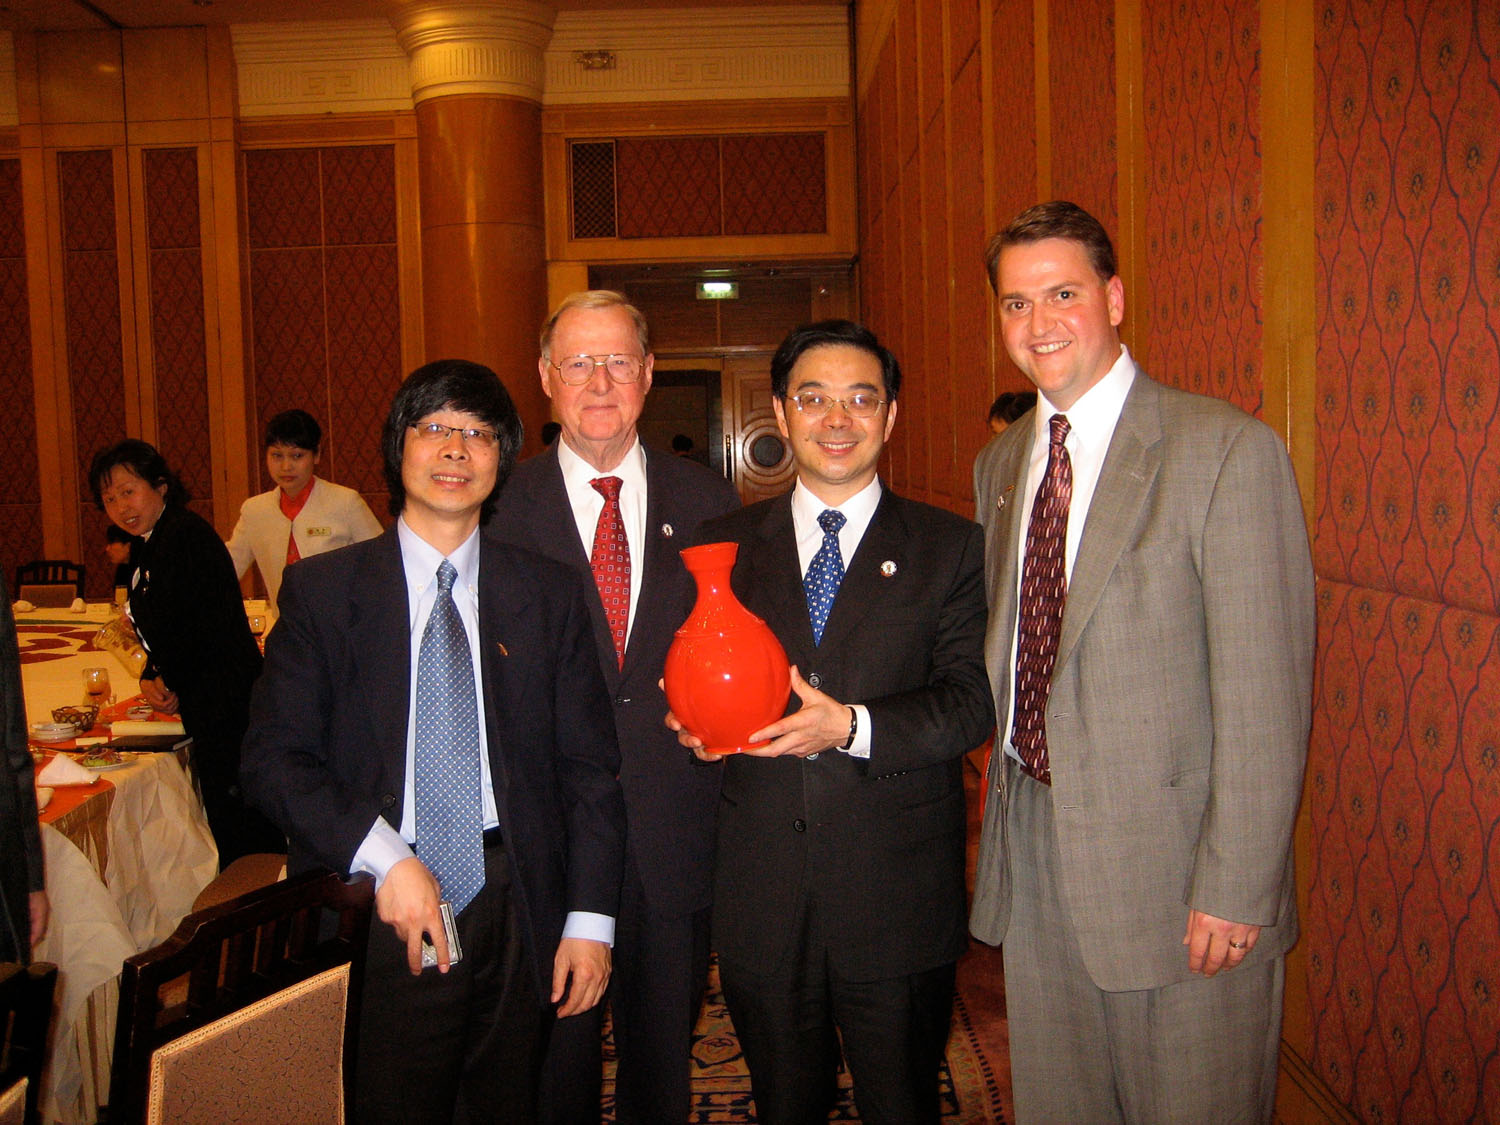   Ben Owen III (far right) presents a vase to the Governor of Hunan Province.  